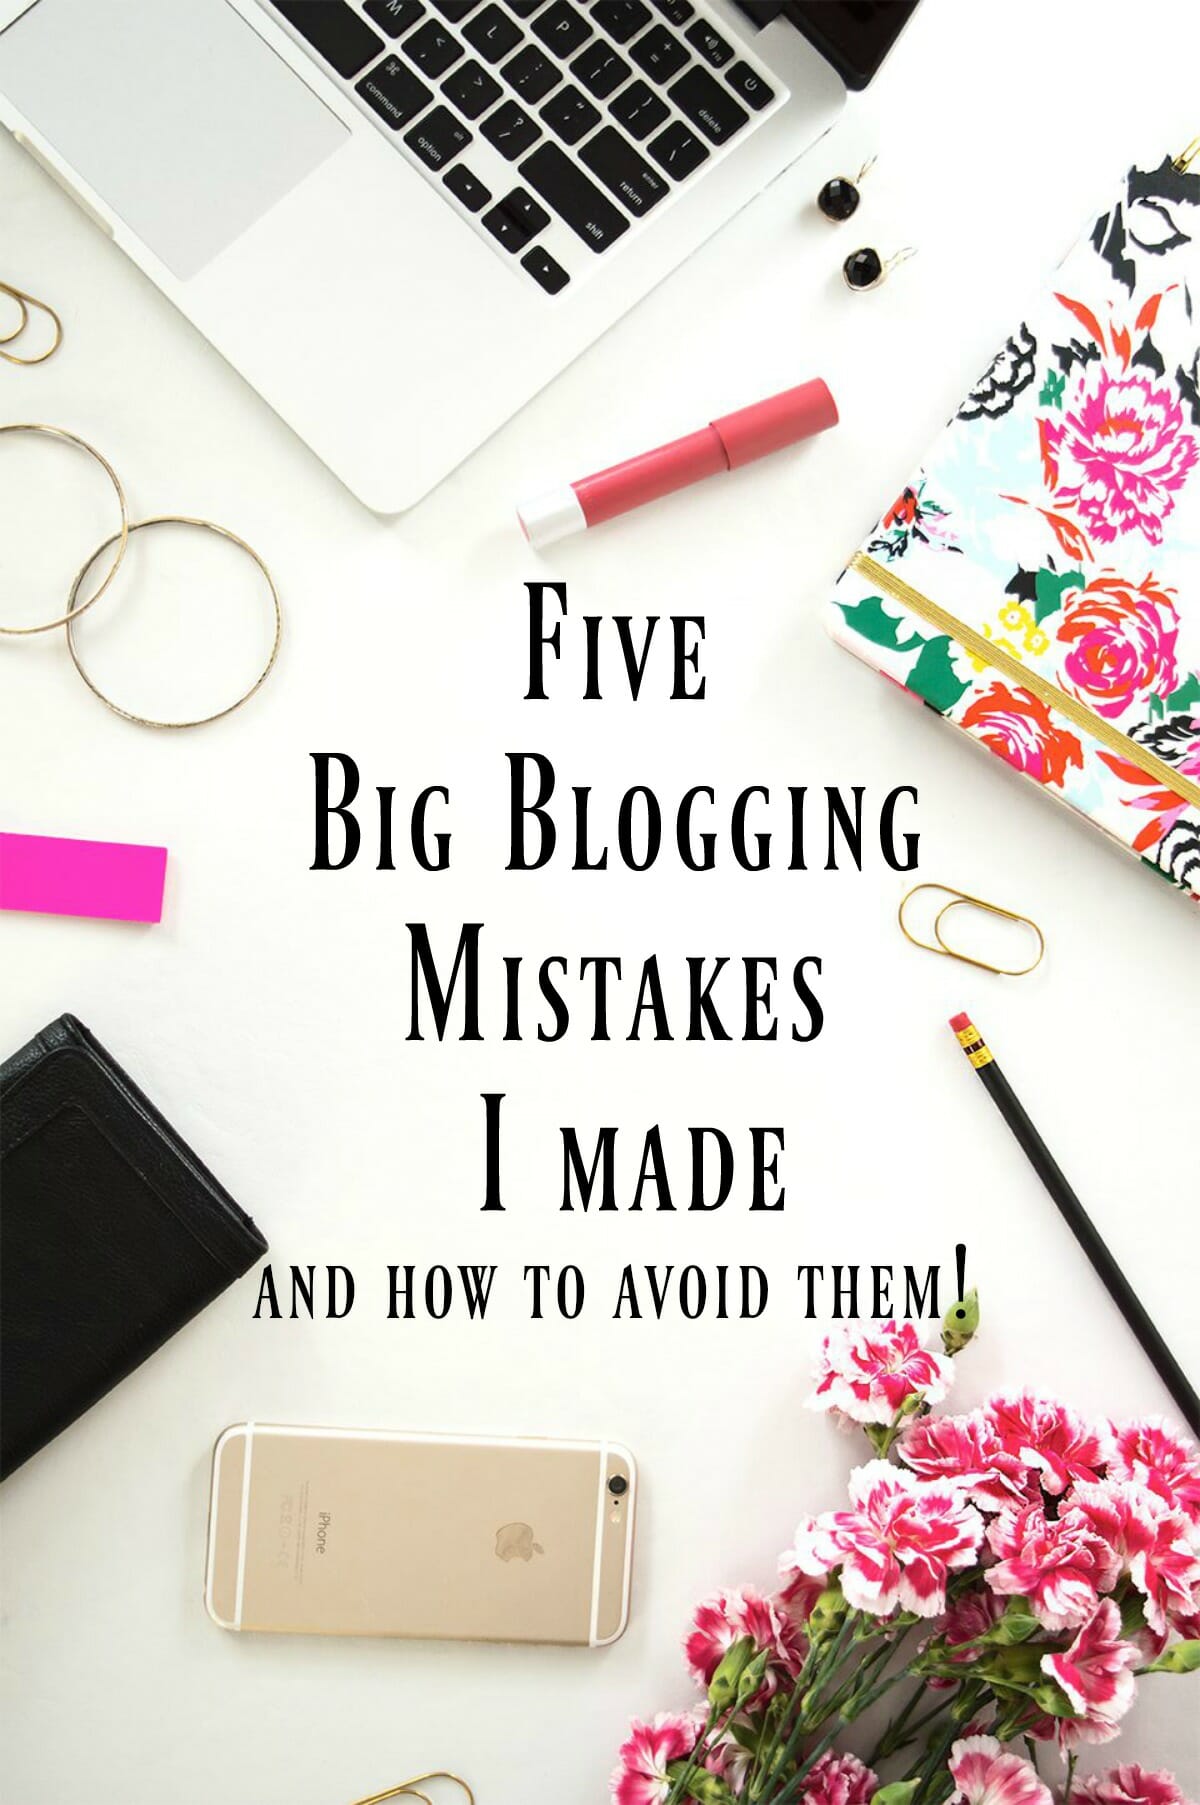 How to avoid common mistakes bloggers make in the beginning!